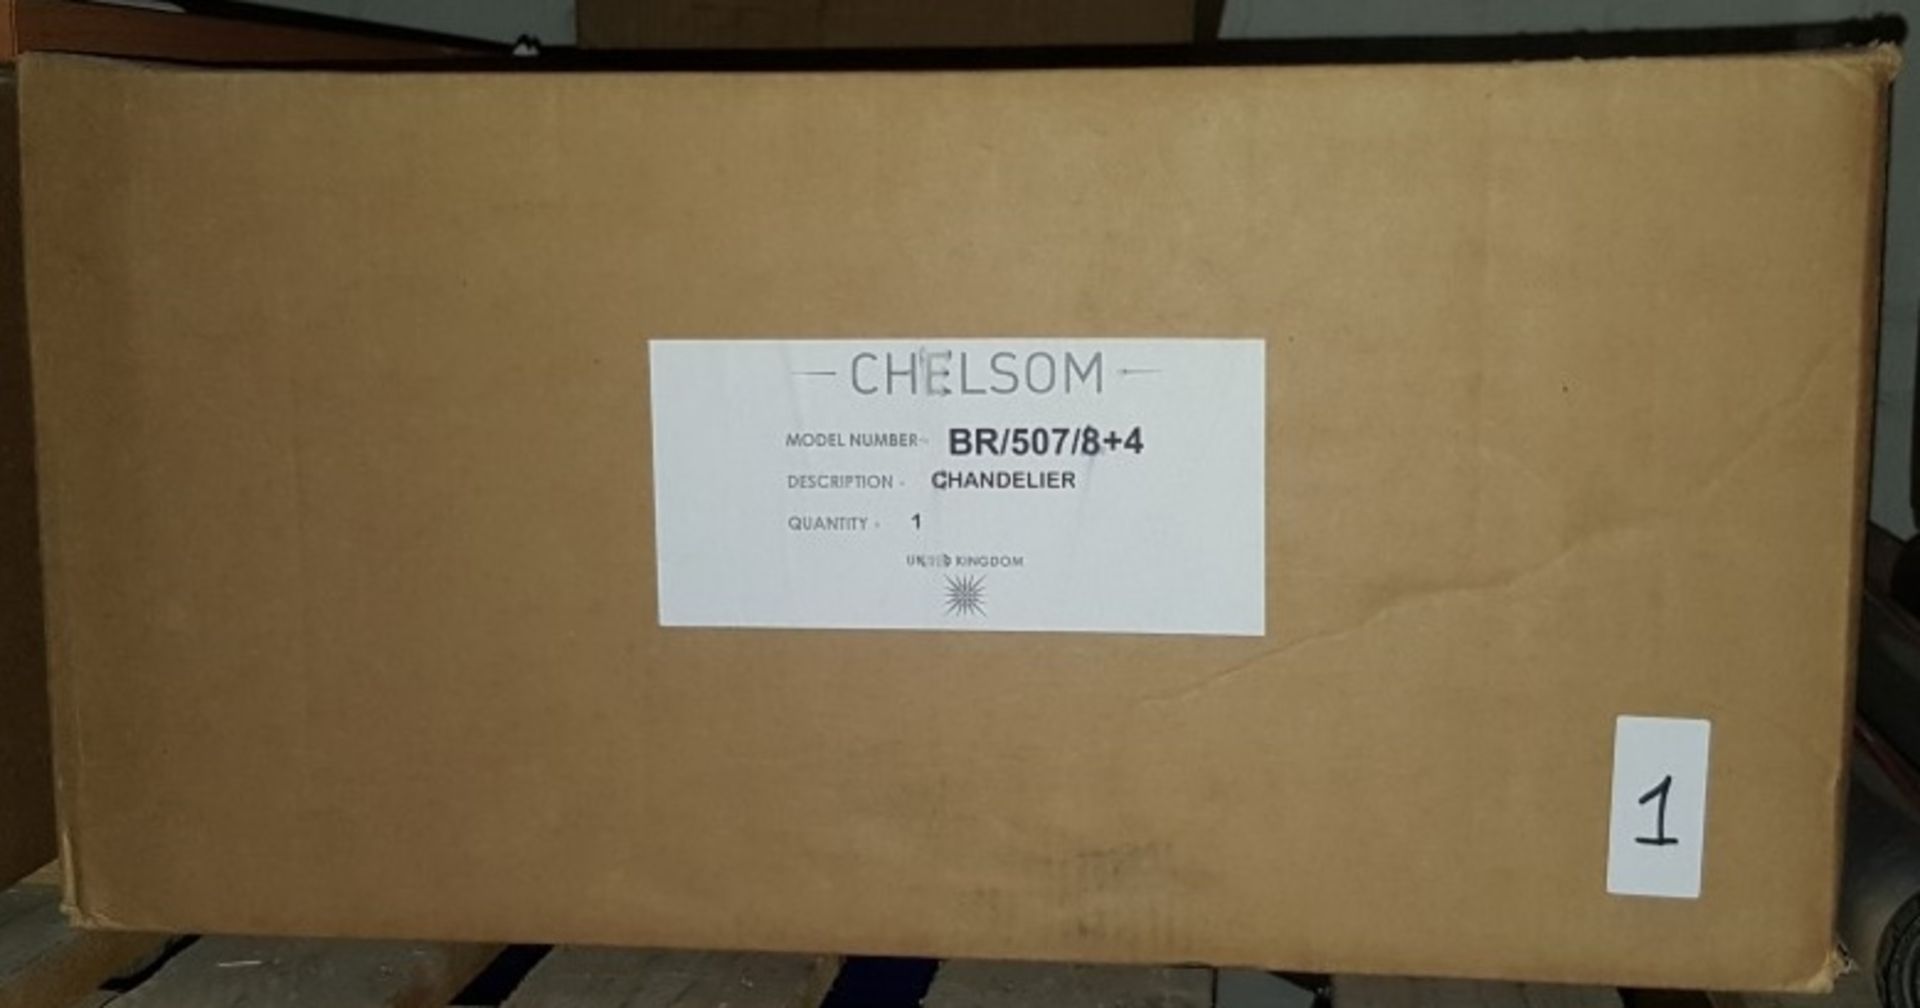 1 x New In Box Chelsom Ballroom Сhandelier BR/507/8+4 - CL001 - REF291/A31 - Location: Altrincham - Image 2 of 3